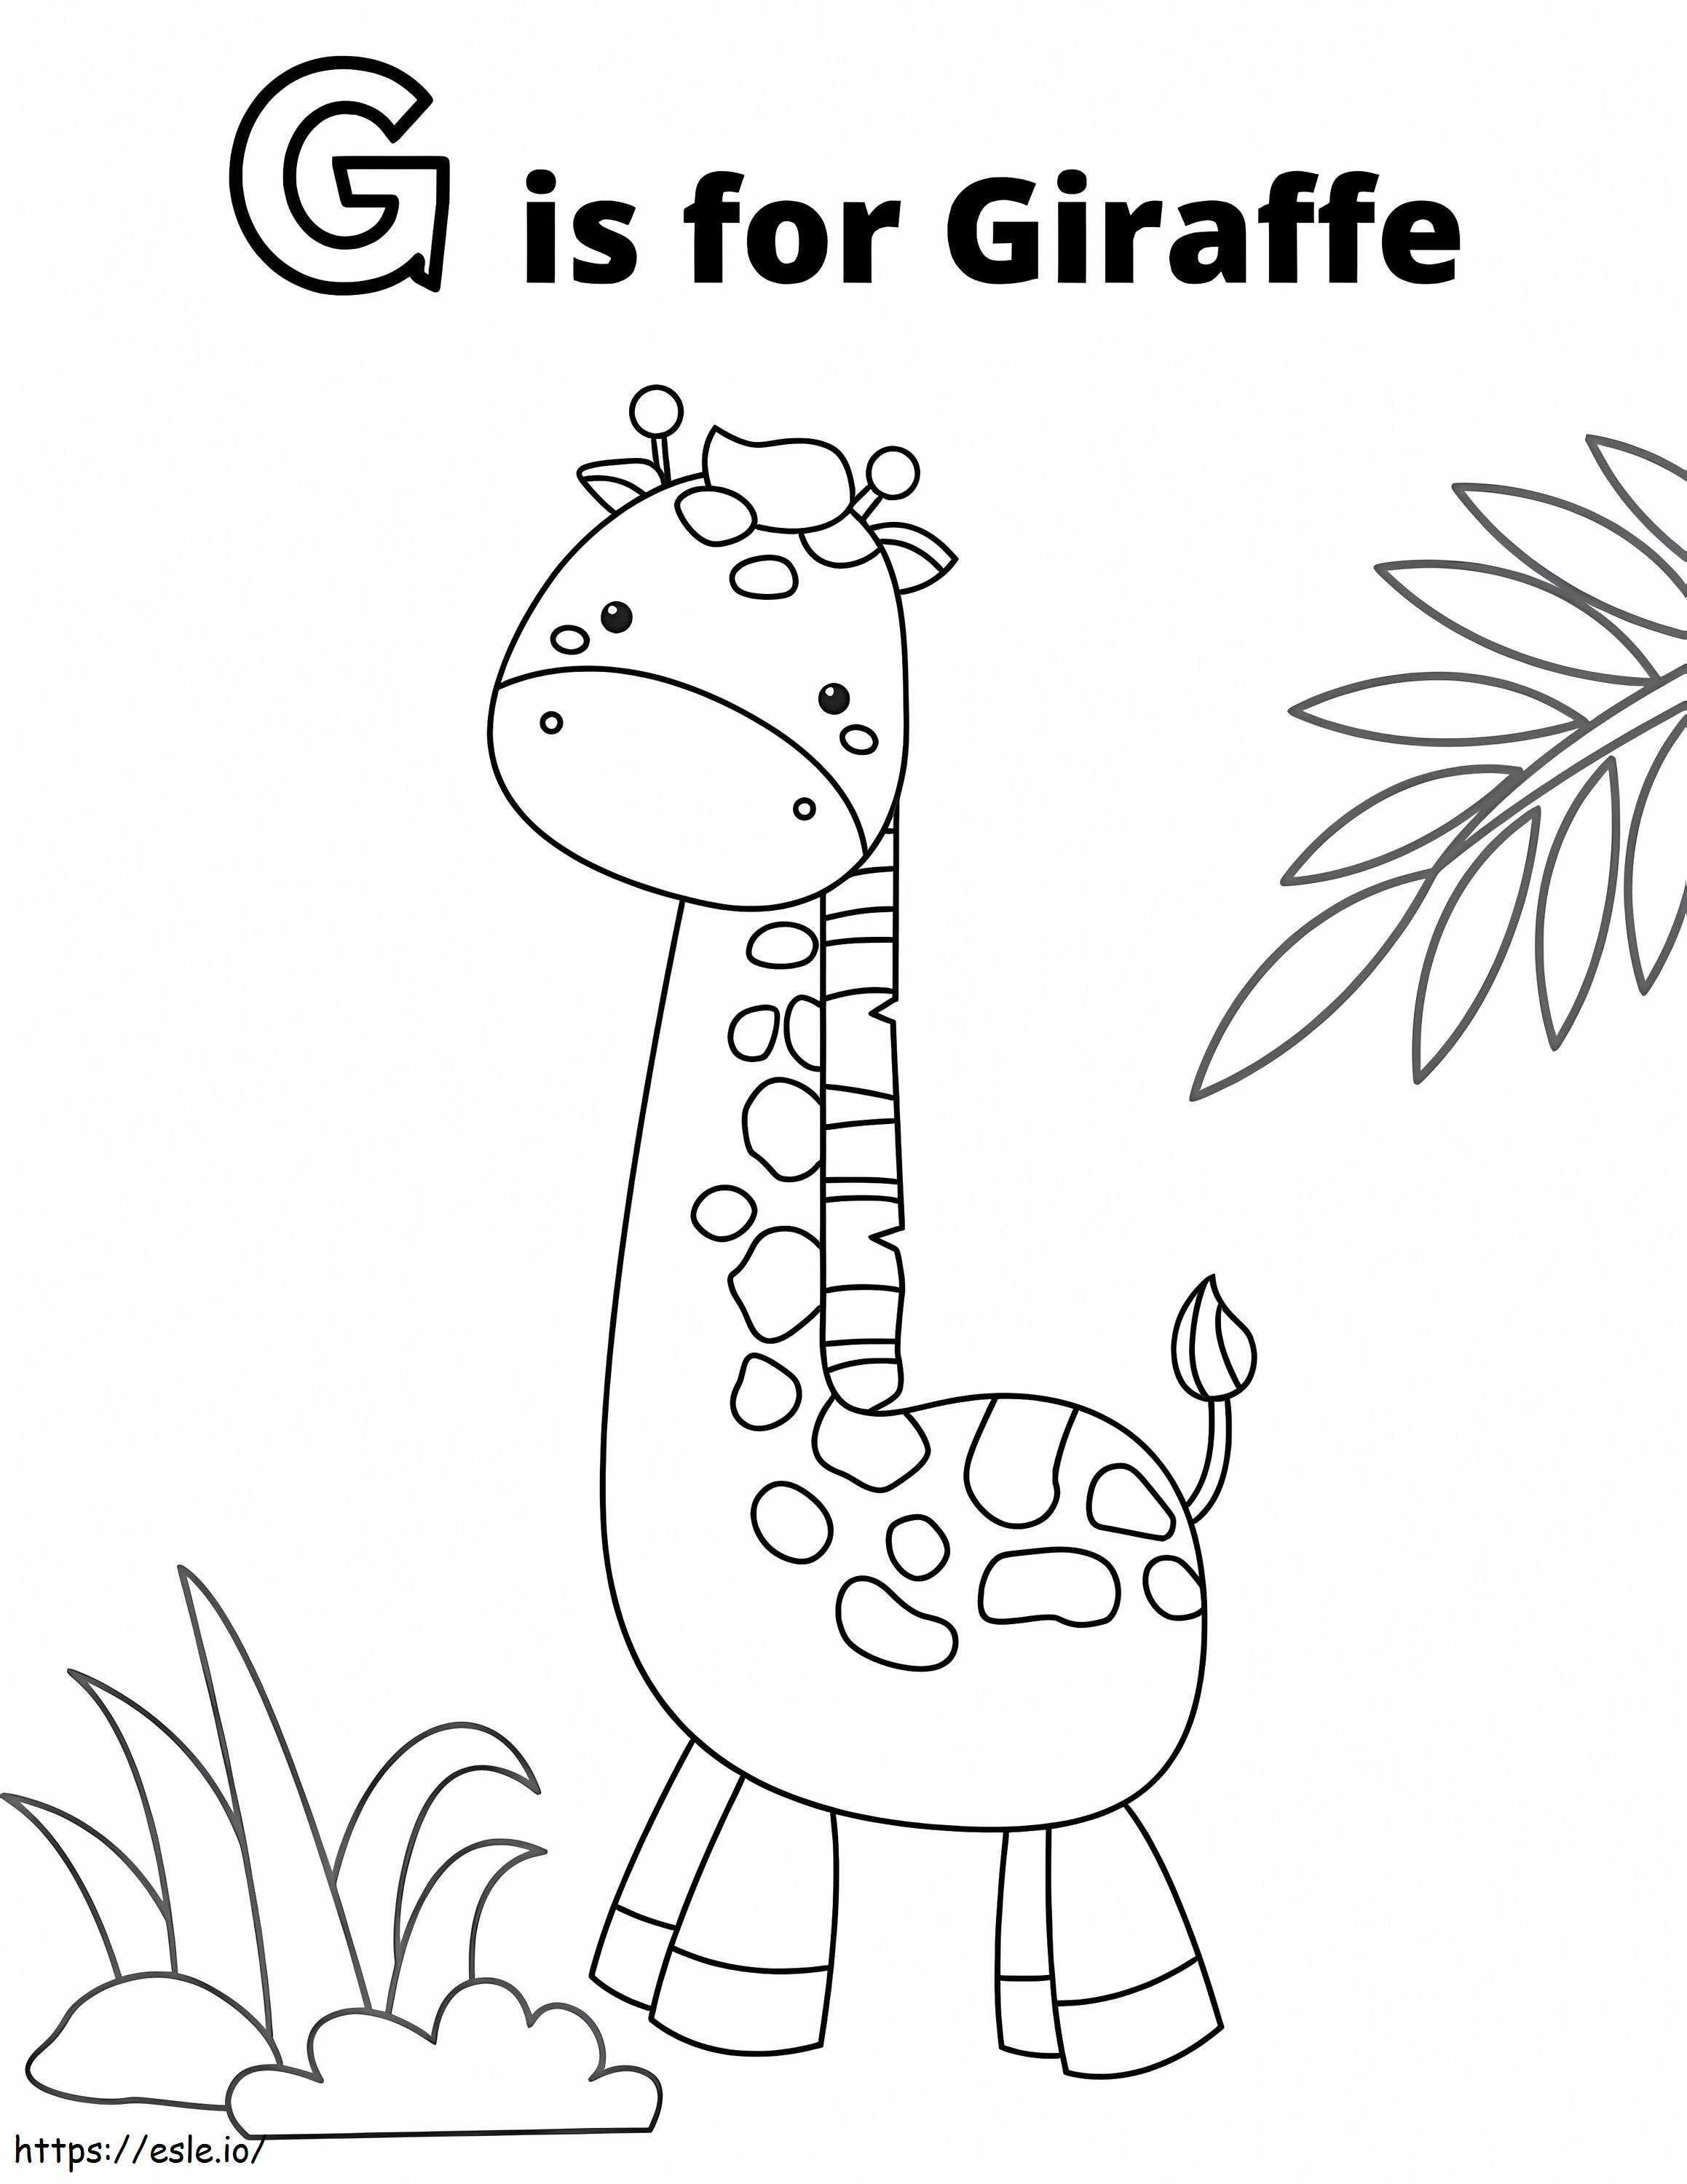 G Is For Giraffe coloring page